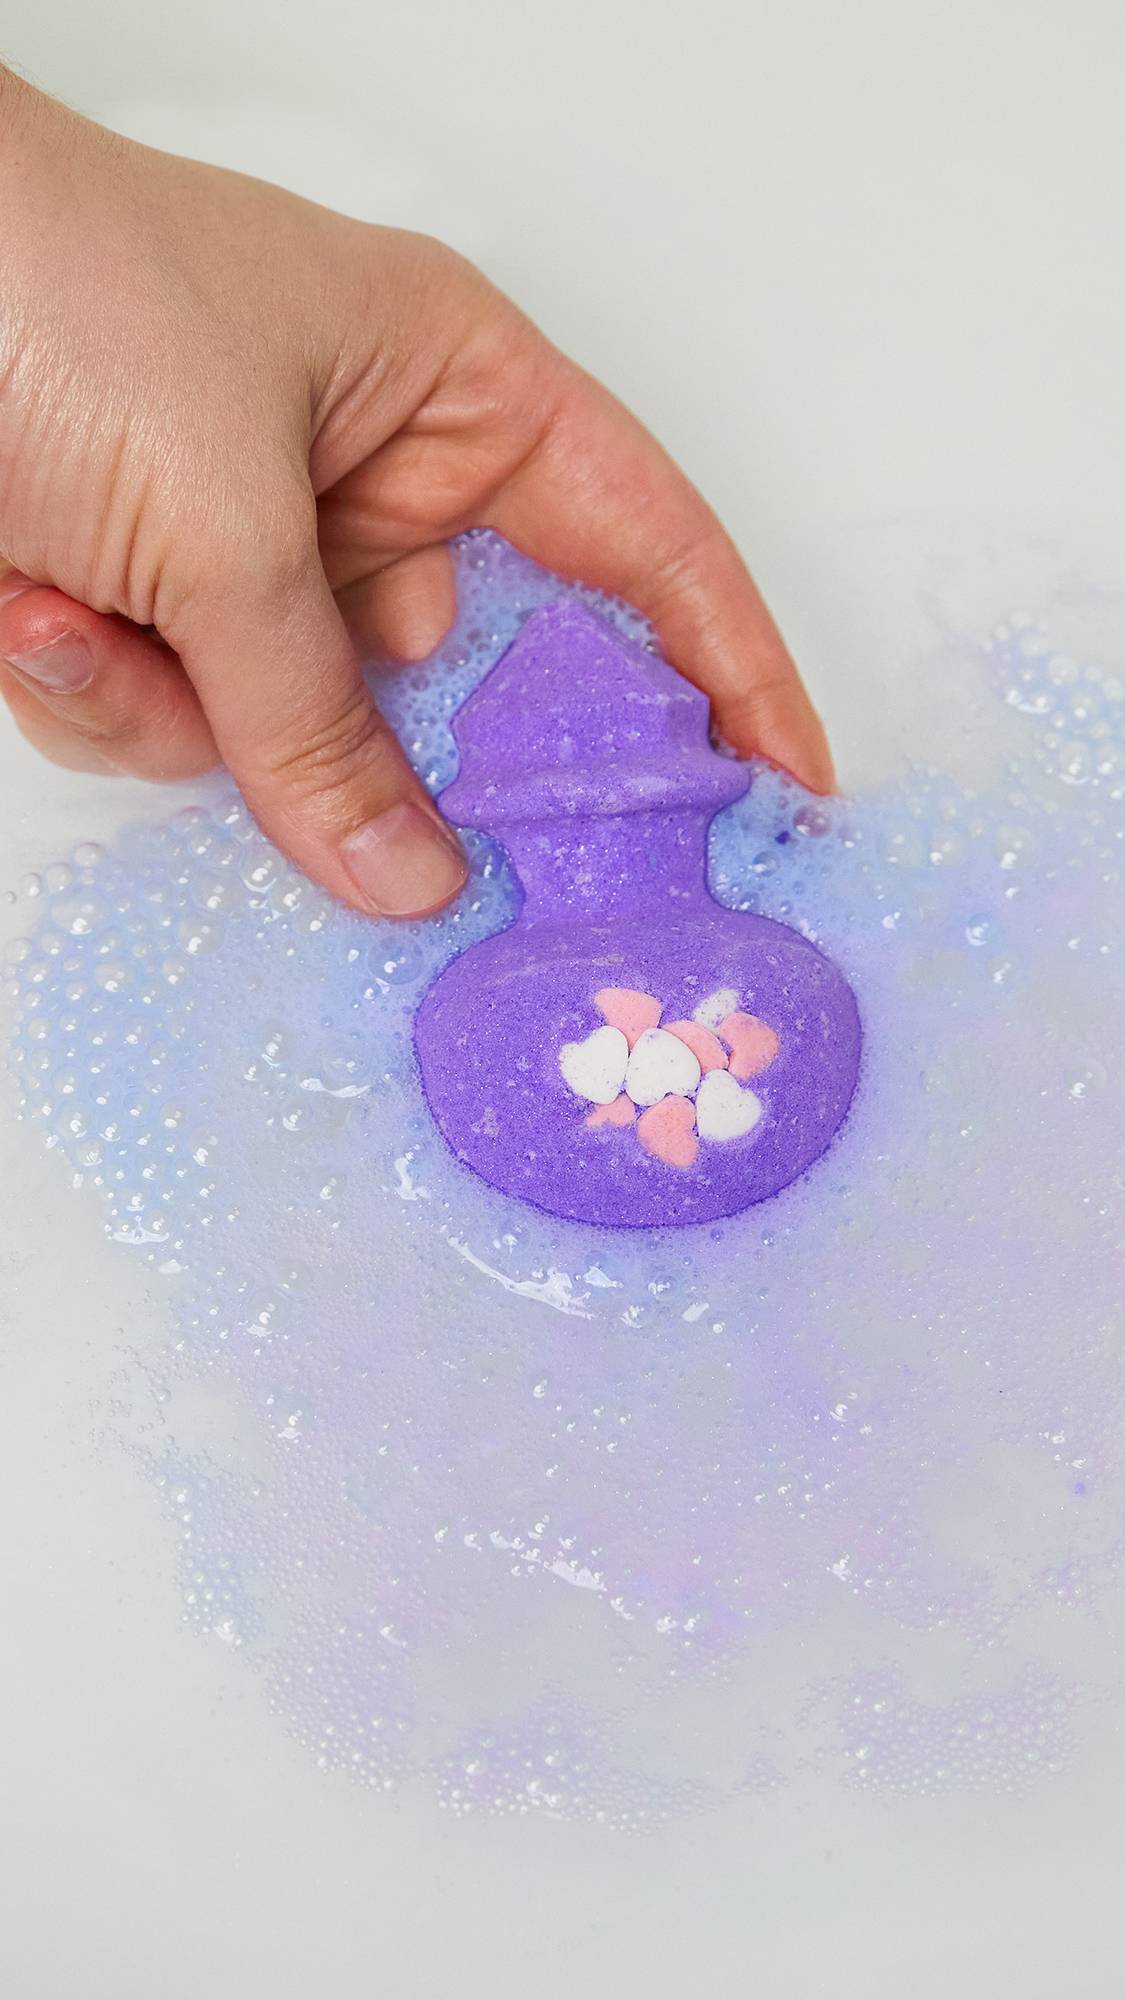 The image shows a close-up of the model's hand as they are gently placing the Love Potion bath bomb into the water. 